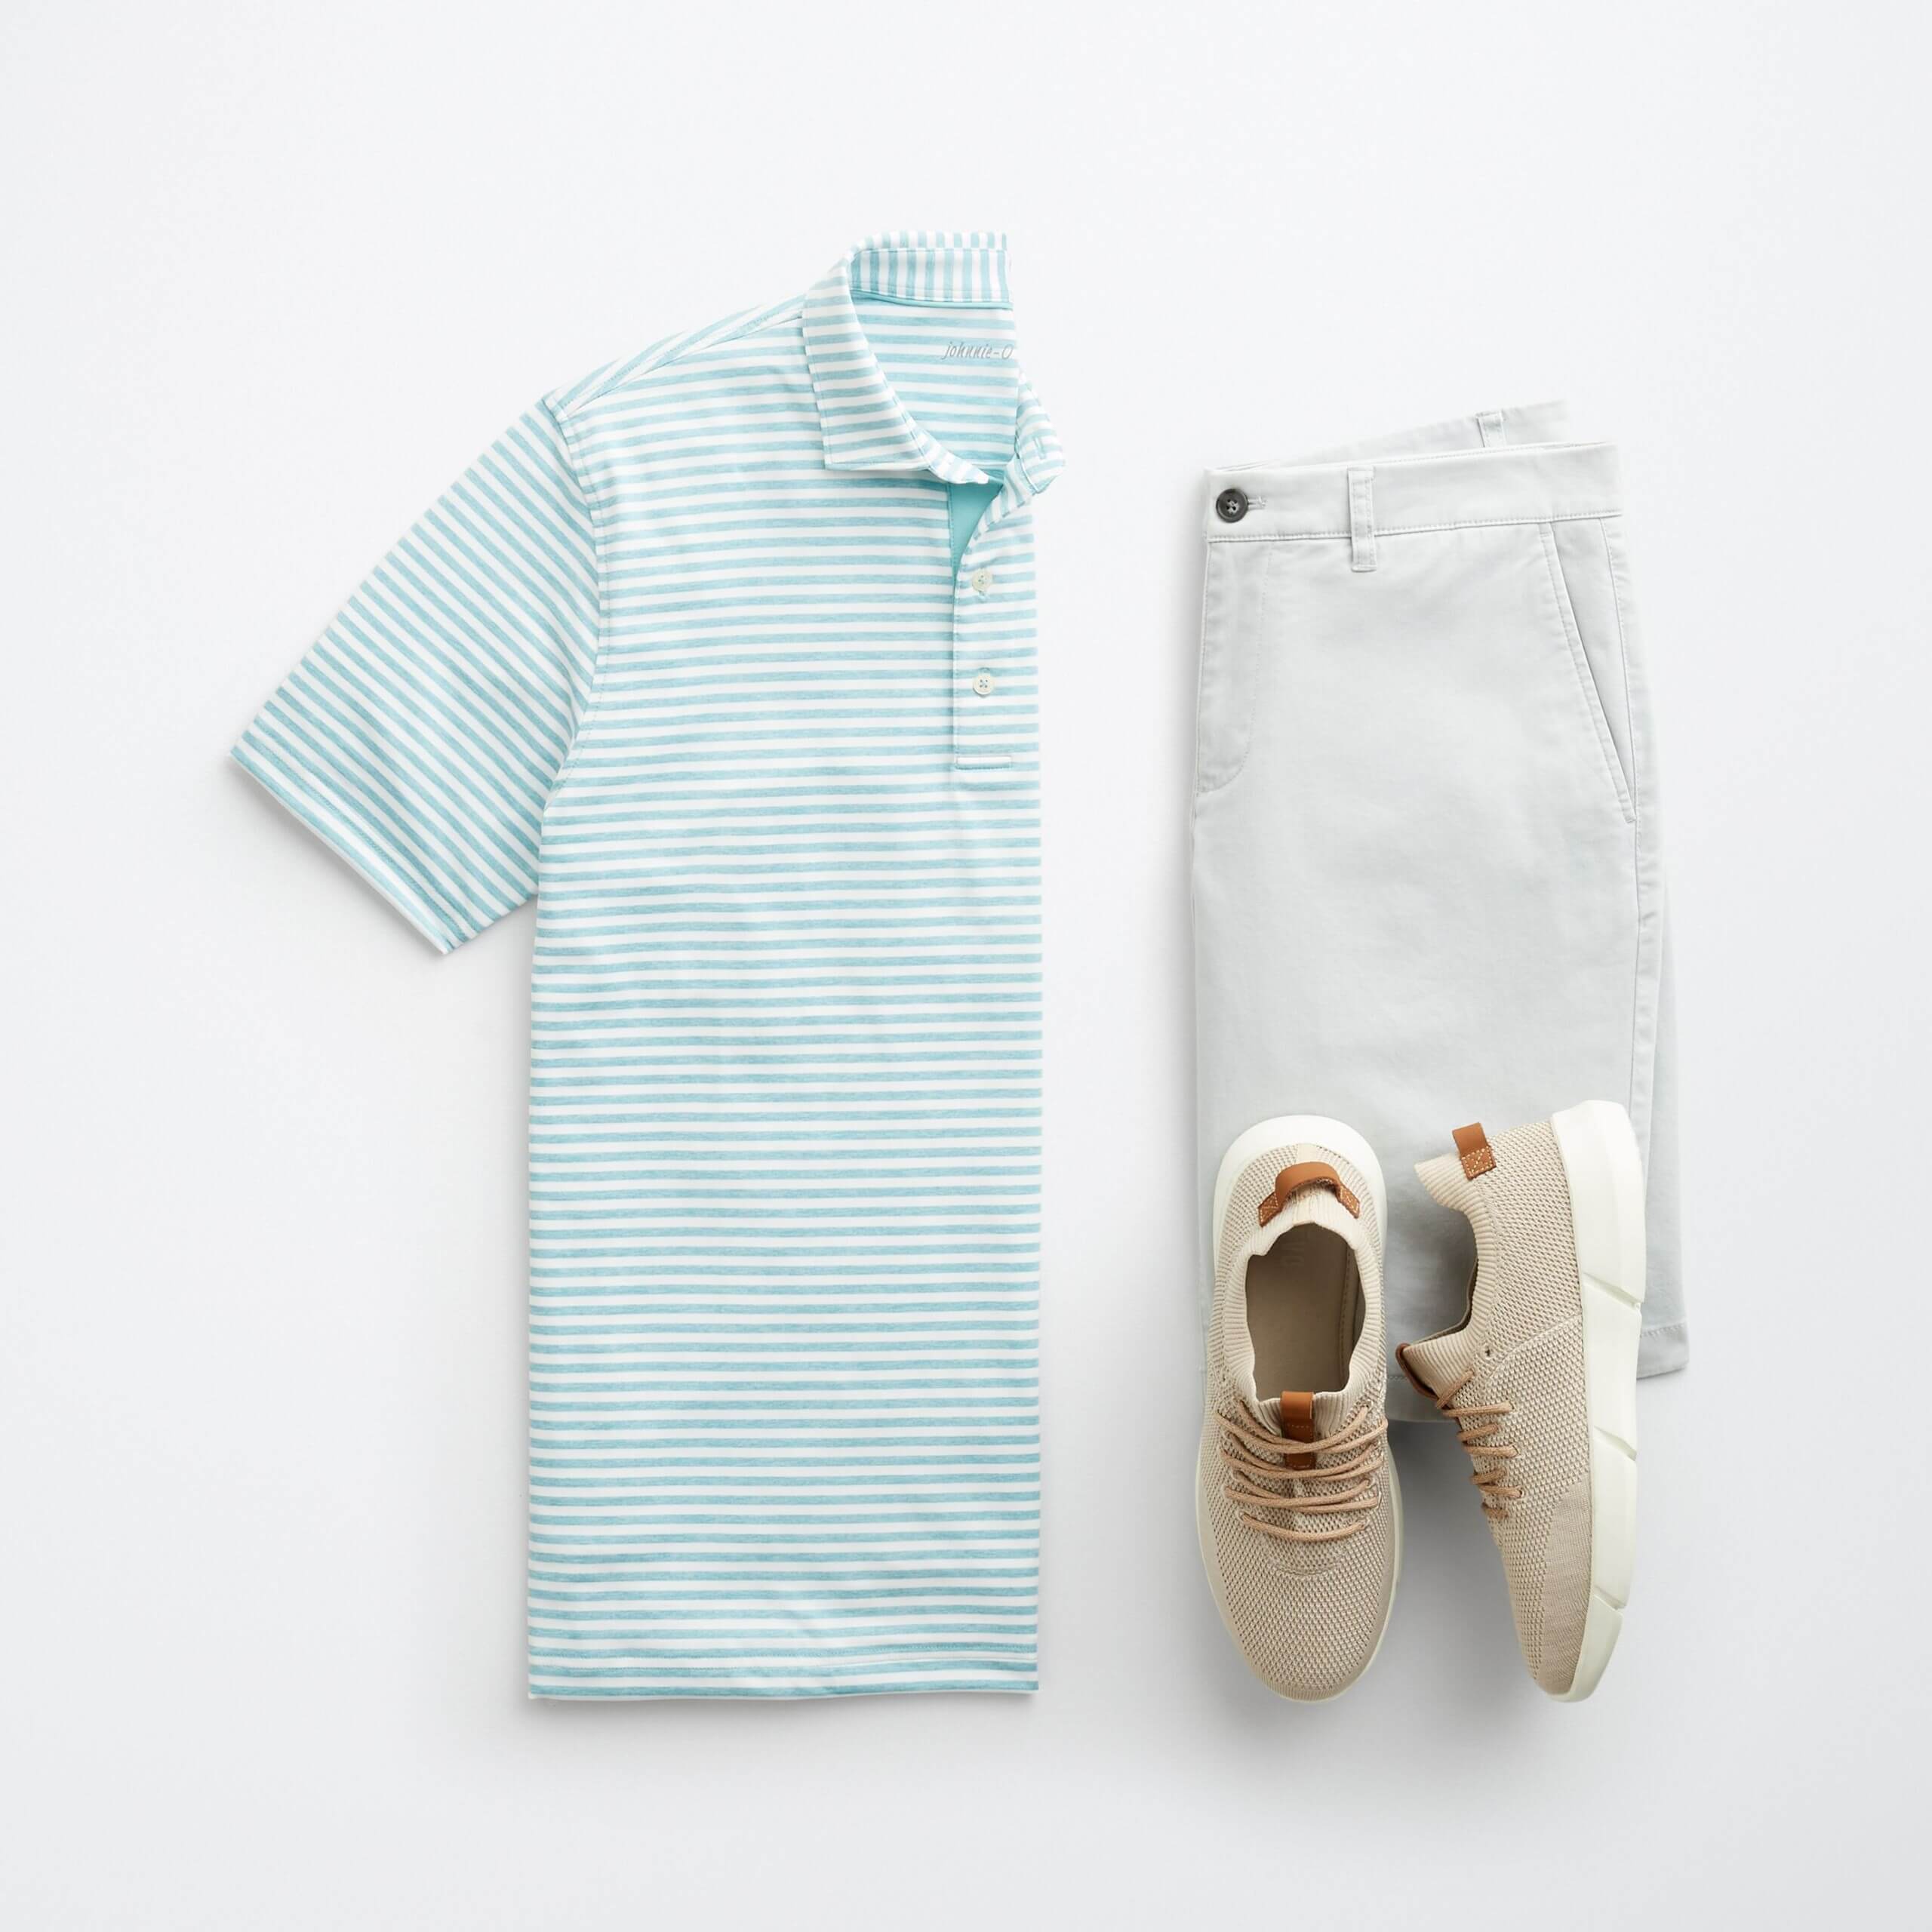 Stitch Fix men’s golf attire featuring a green striped polo, off-white pants and tan sneakers.